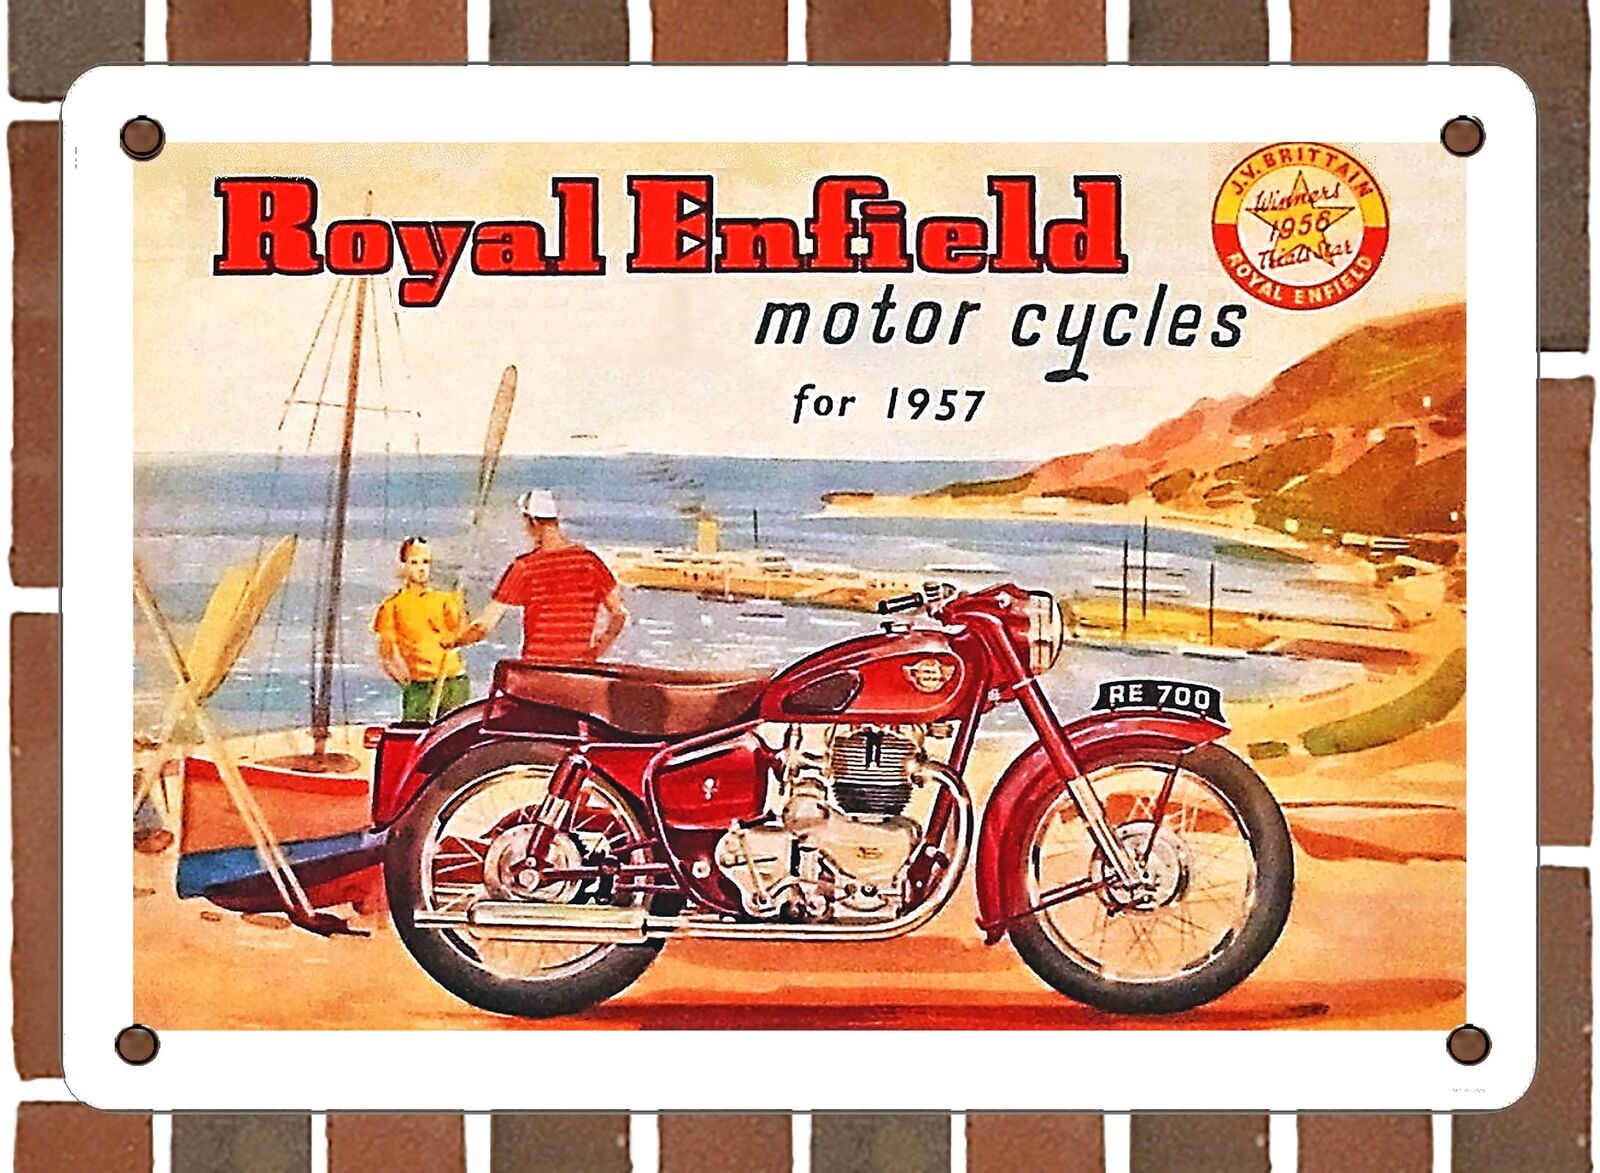 METAL SIGN - 1957 Royal Enfield Motorcycles for 1957 - 10x14 Inches